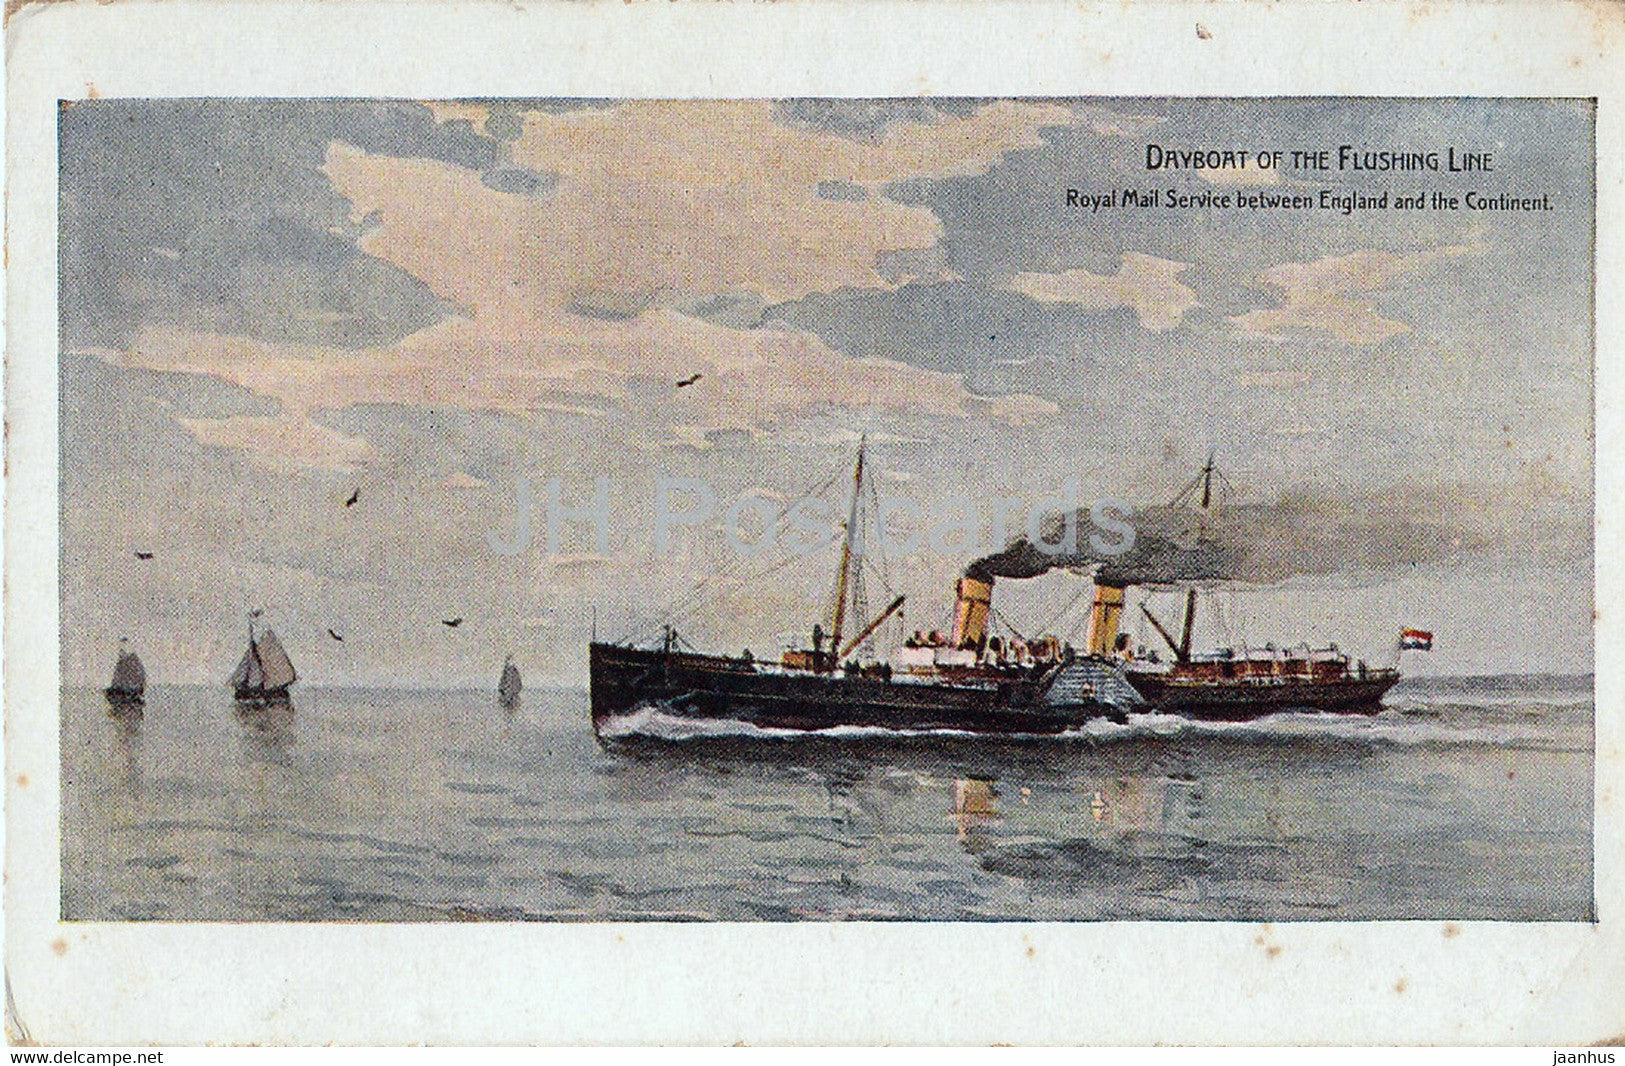 Dayboat of the Flushing Line - Royal Mail Service between England and the Continent - ship - steamer - old postcard used - JH Postcards